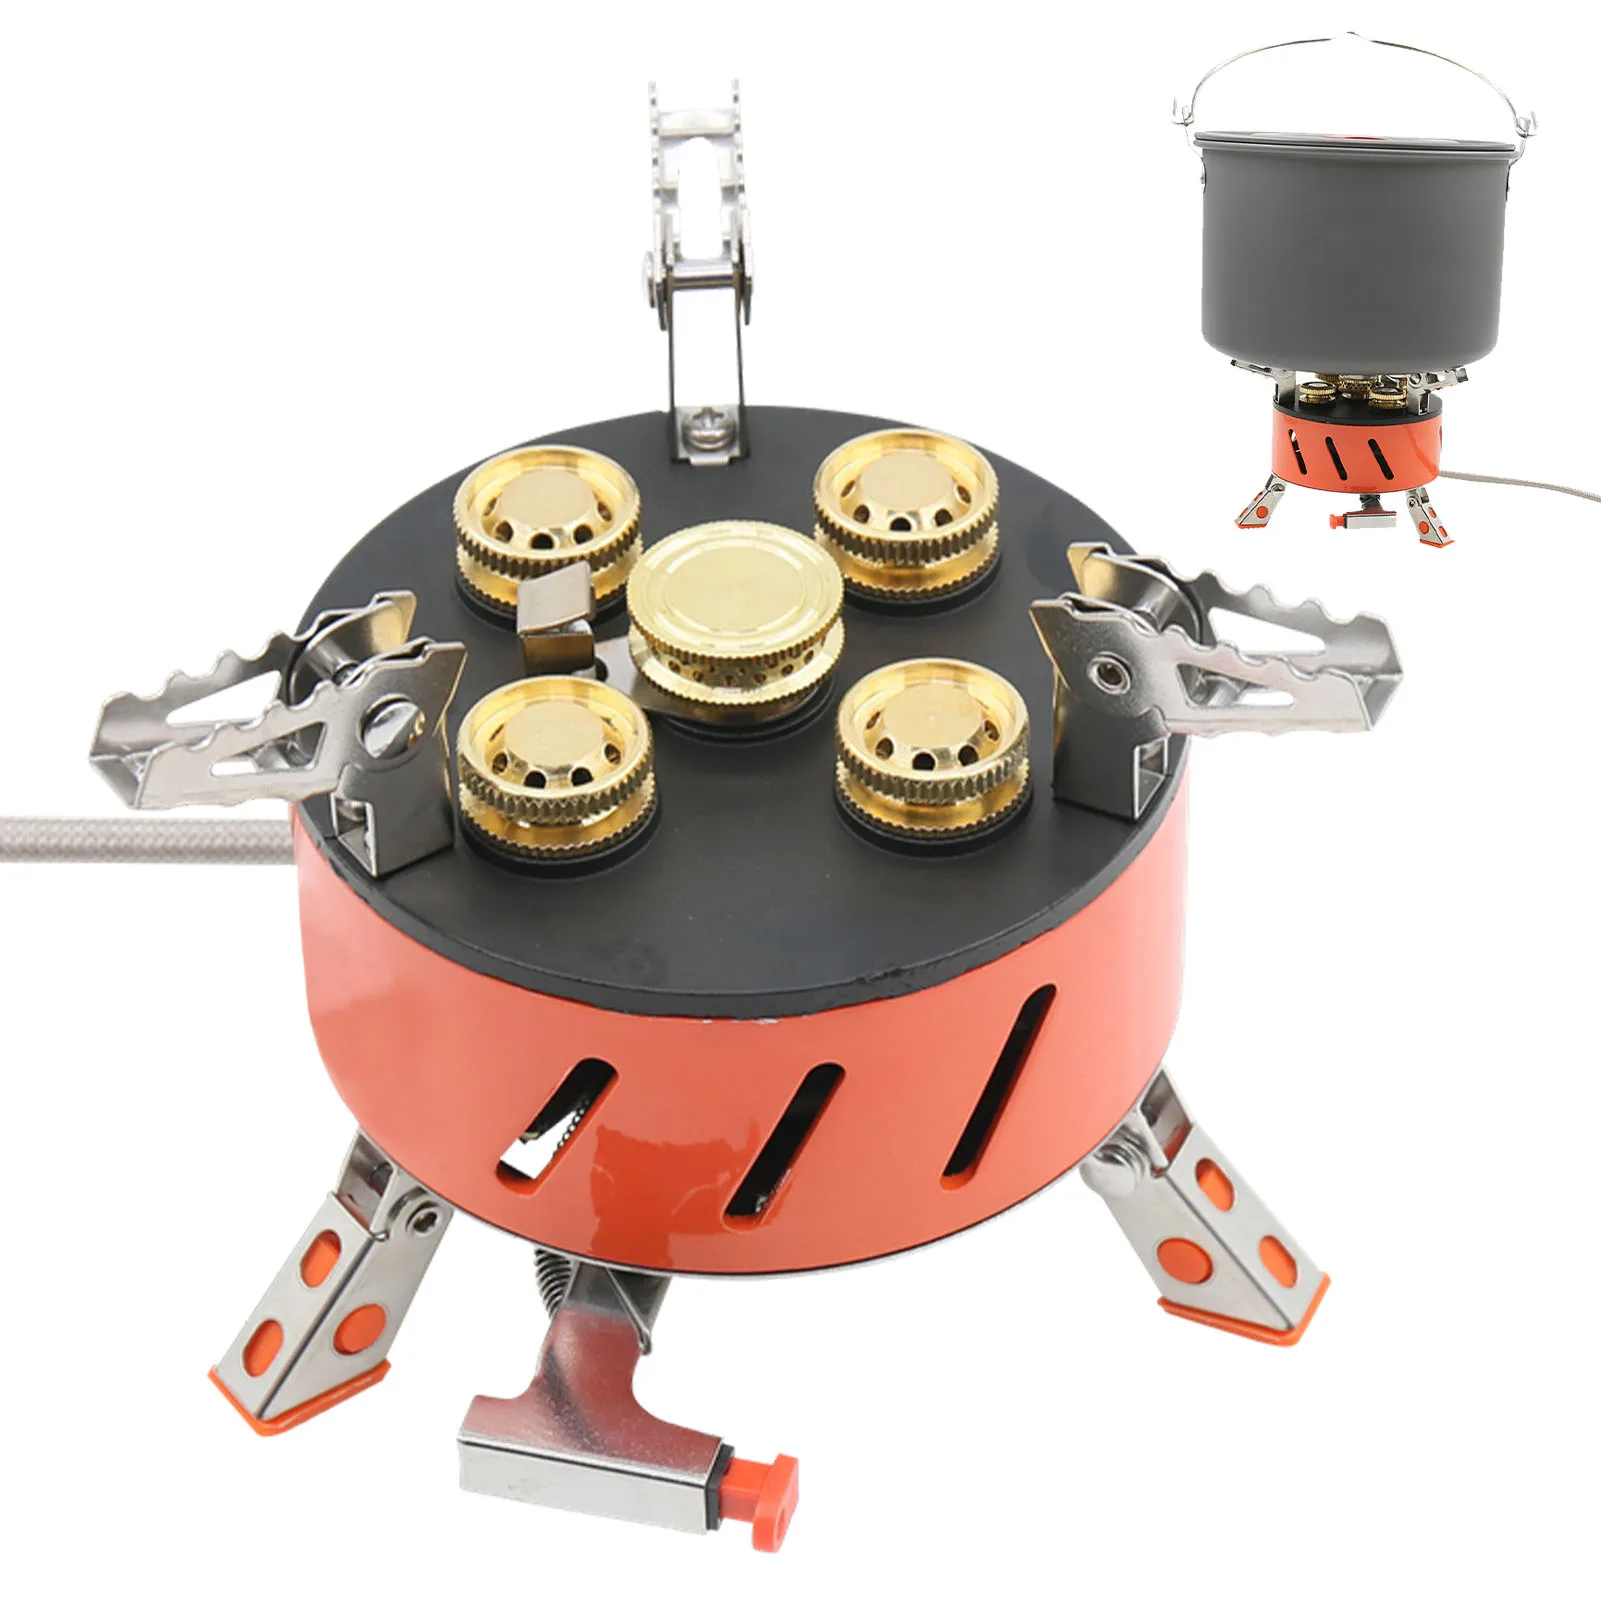 

15800 W Strong Fire Burner Stove Outdoor Wind-proof Gas Burner Stainless Steel Foldable Camping Supplies BBQ Backpacking 1013